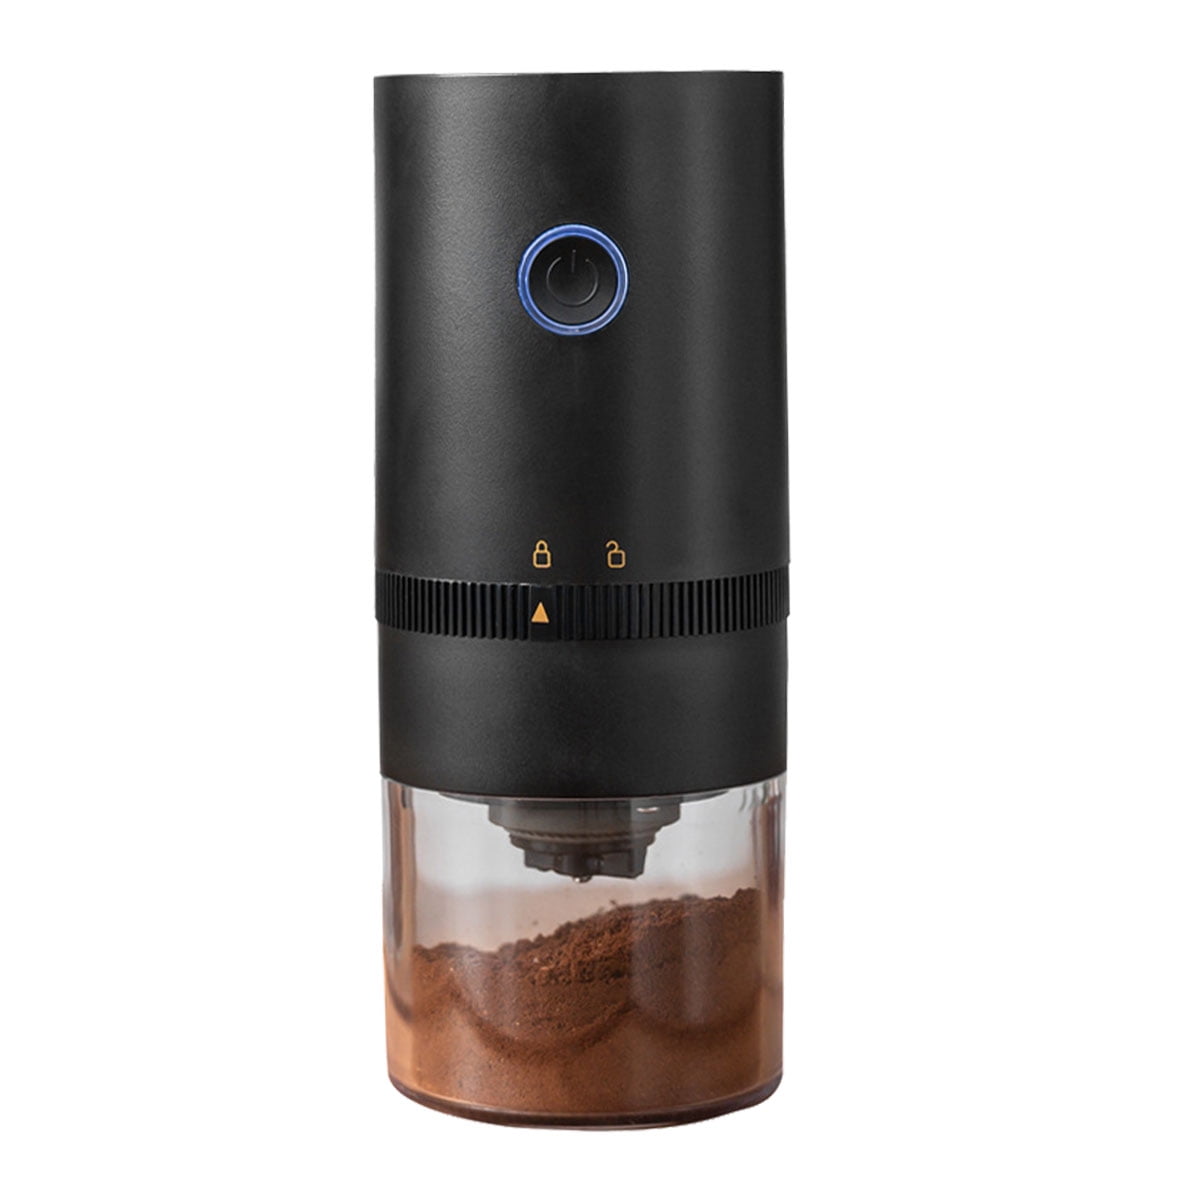 Electric Portable Espresso Machine Small Coffee Grinders Coffee Beans Grinder 5 Levels Grind Camping Travel Coffee Maker Ceramic Burr Grinder with